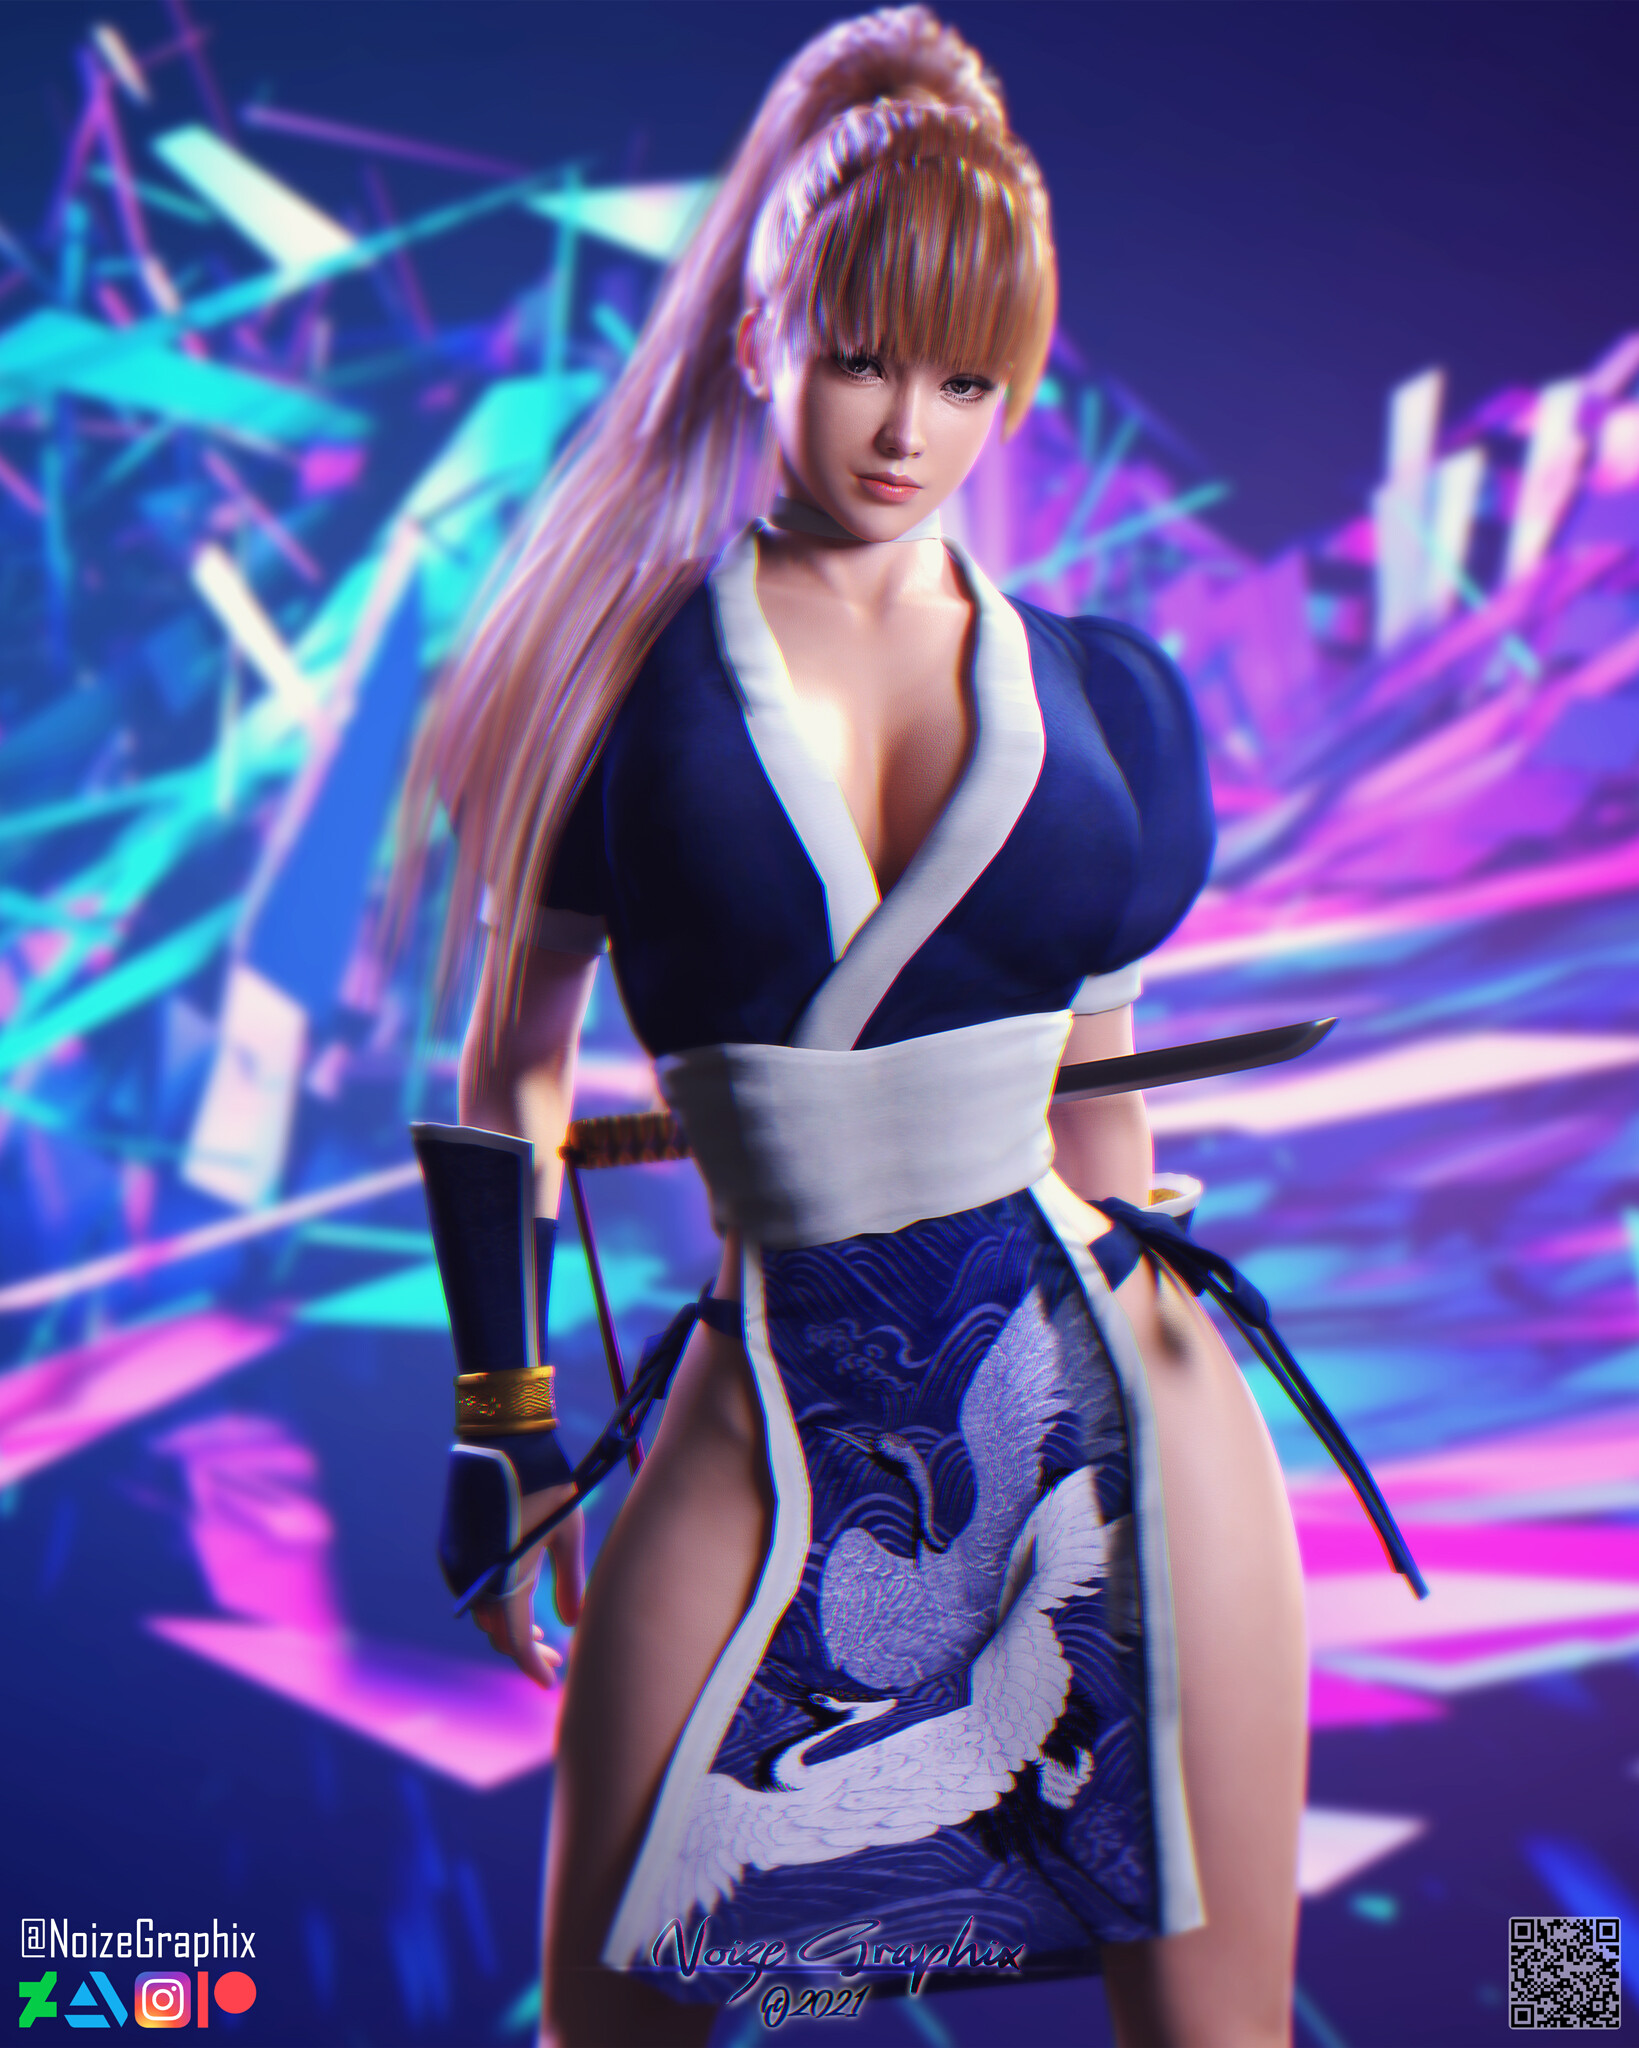 Fanart of [Kasumi] from [Dead or Alive]. 